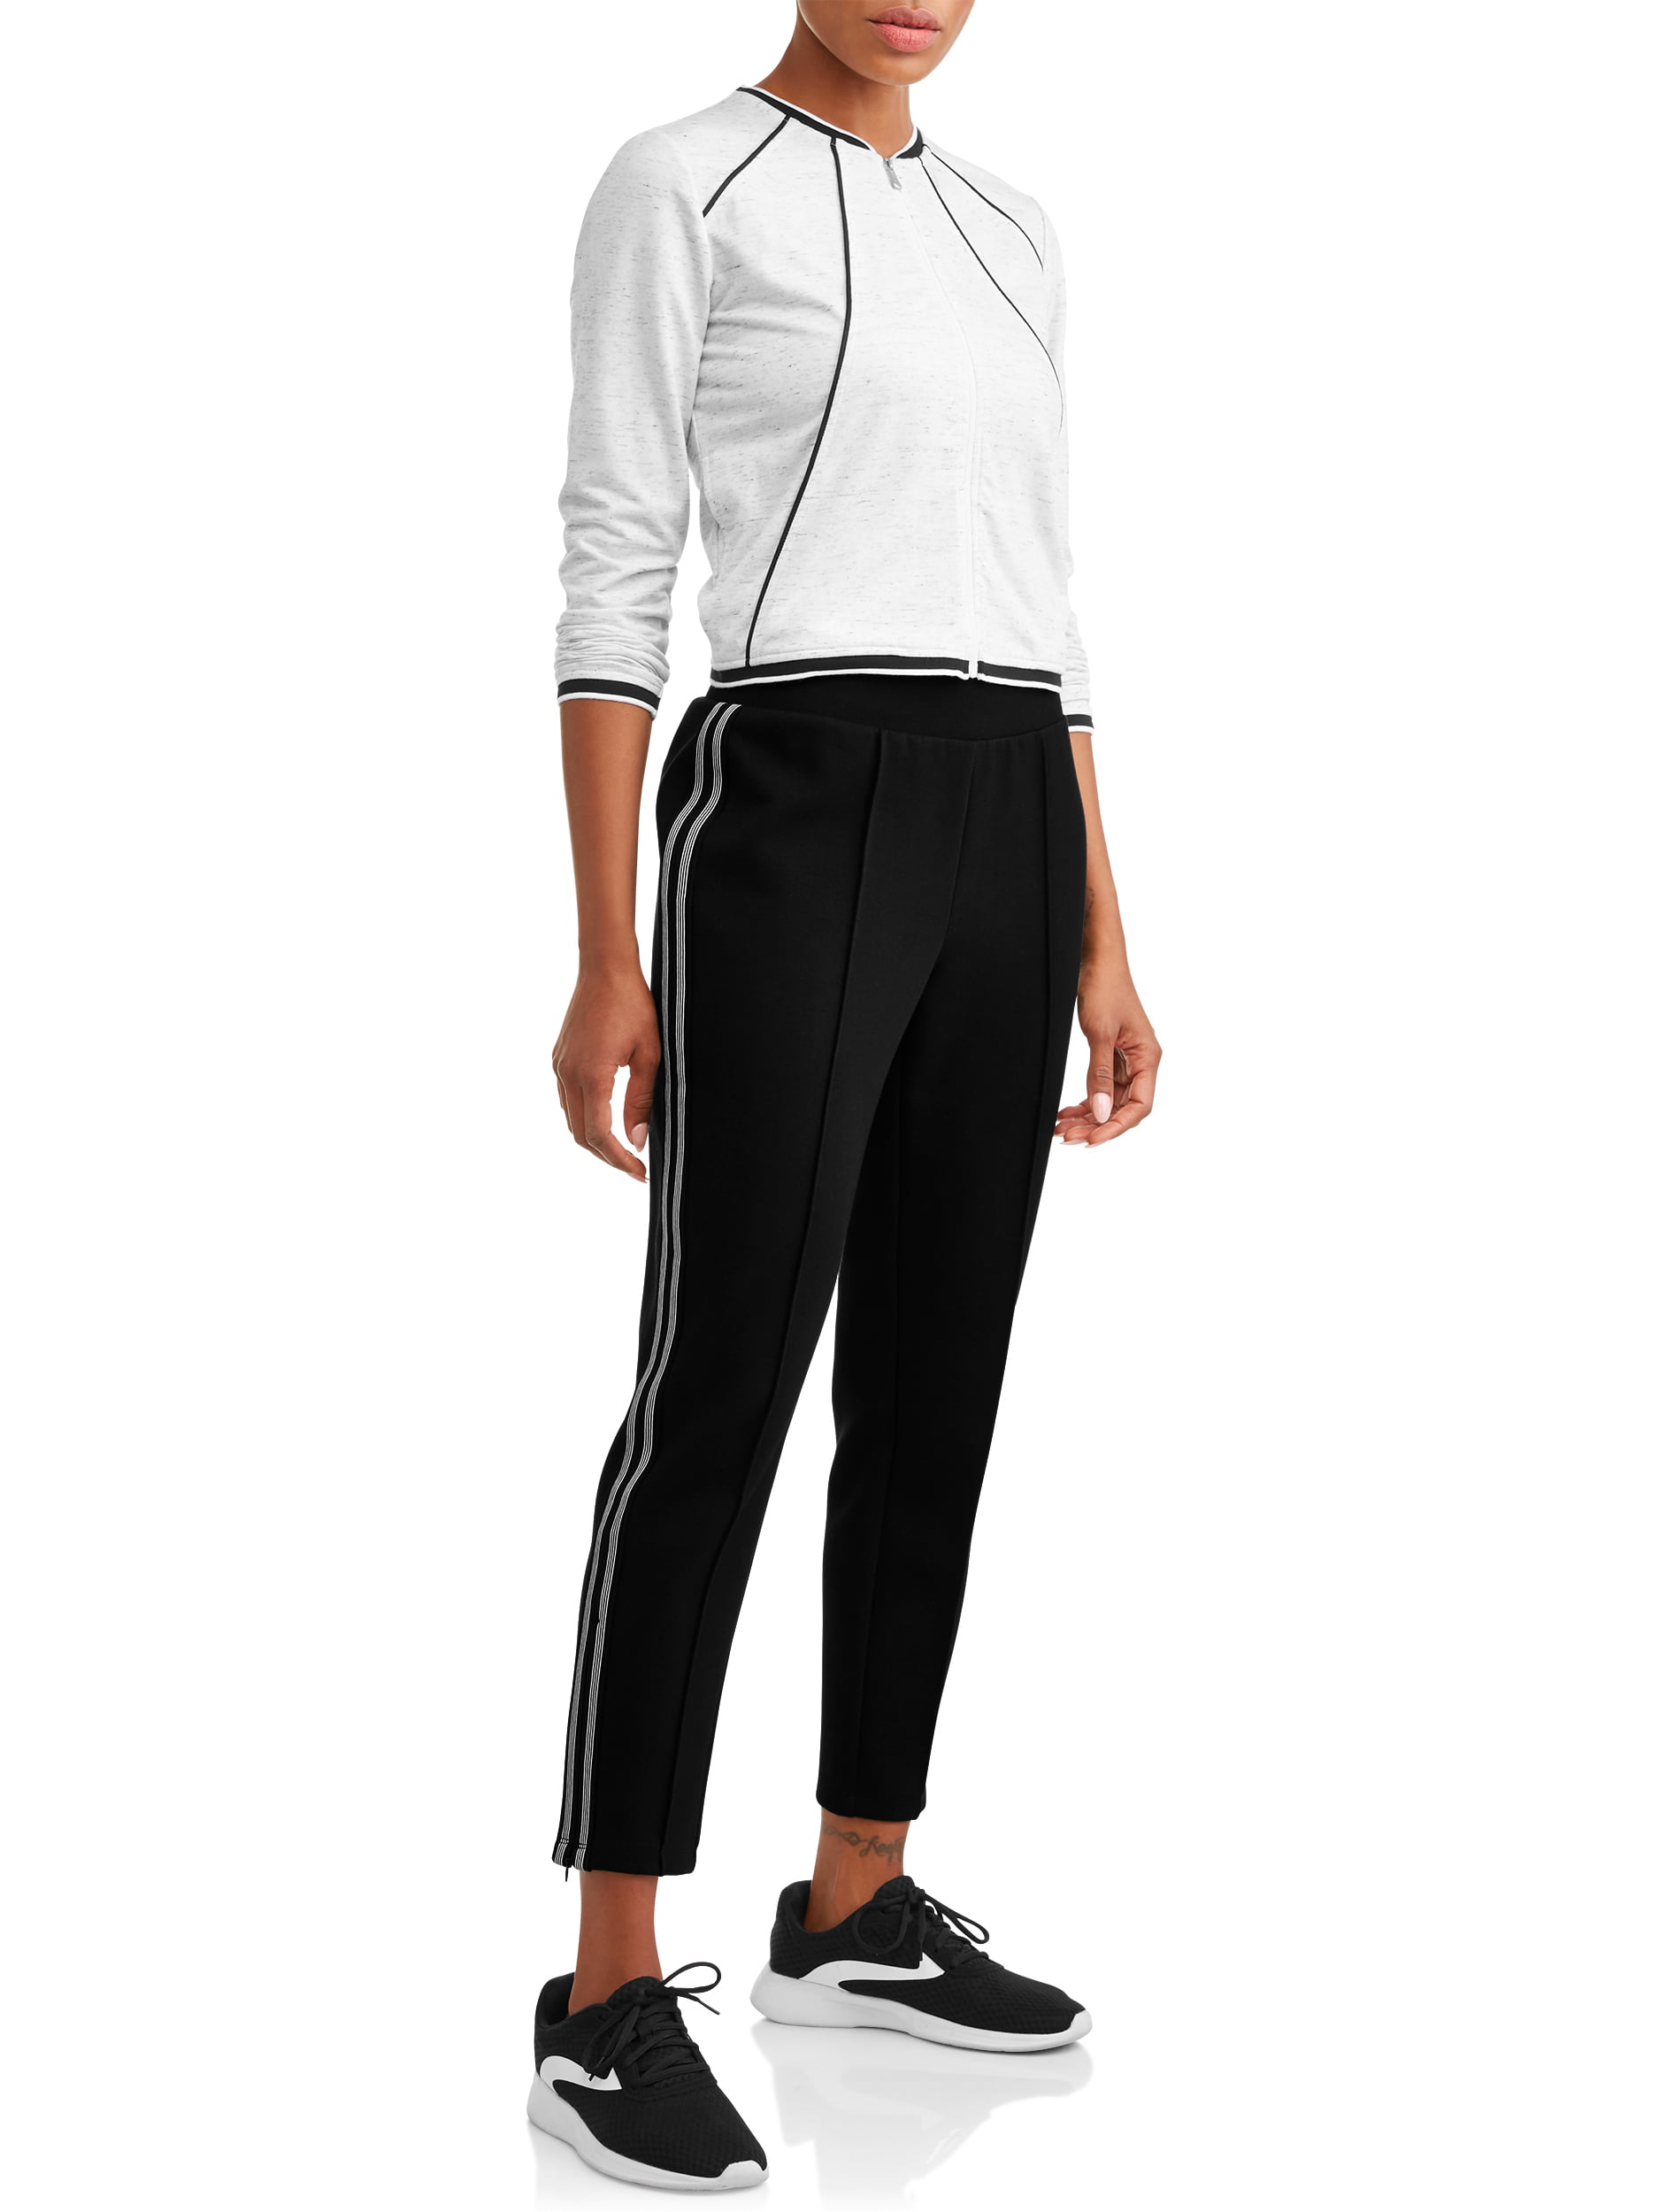 Avia Women's Athleisure Travel Pant With Side Stripe 